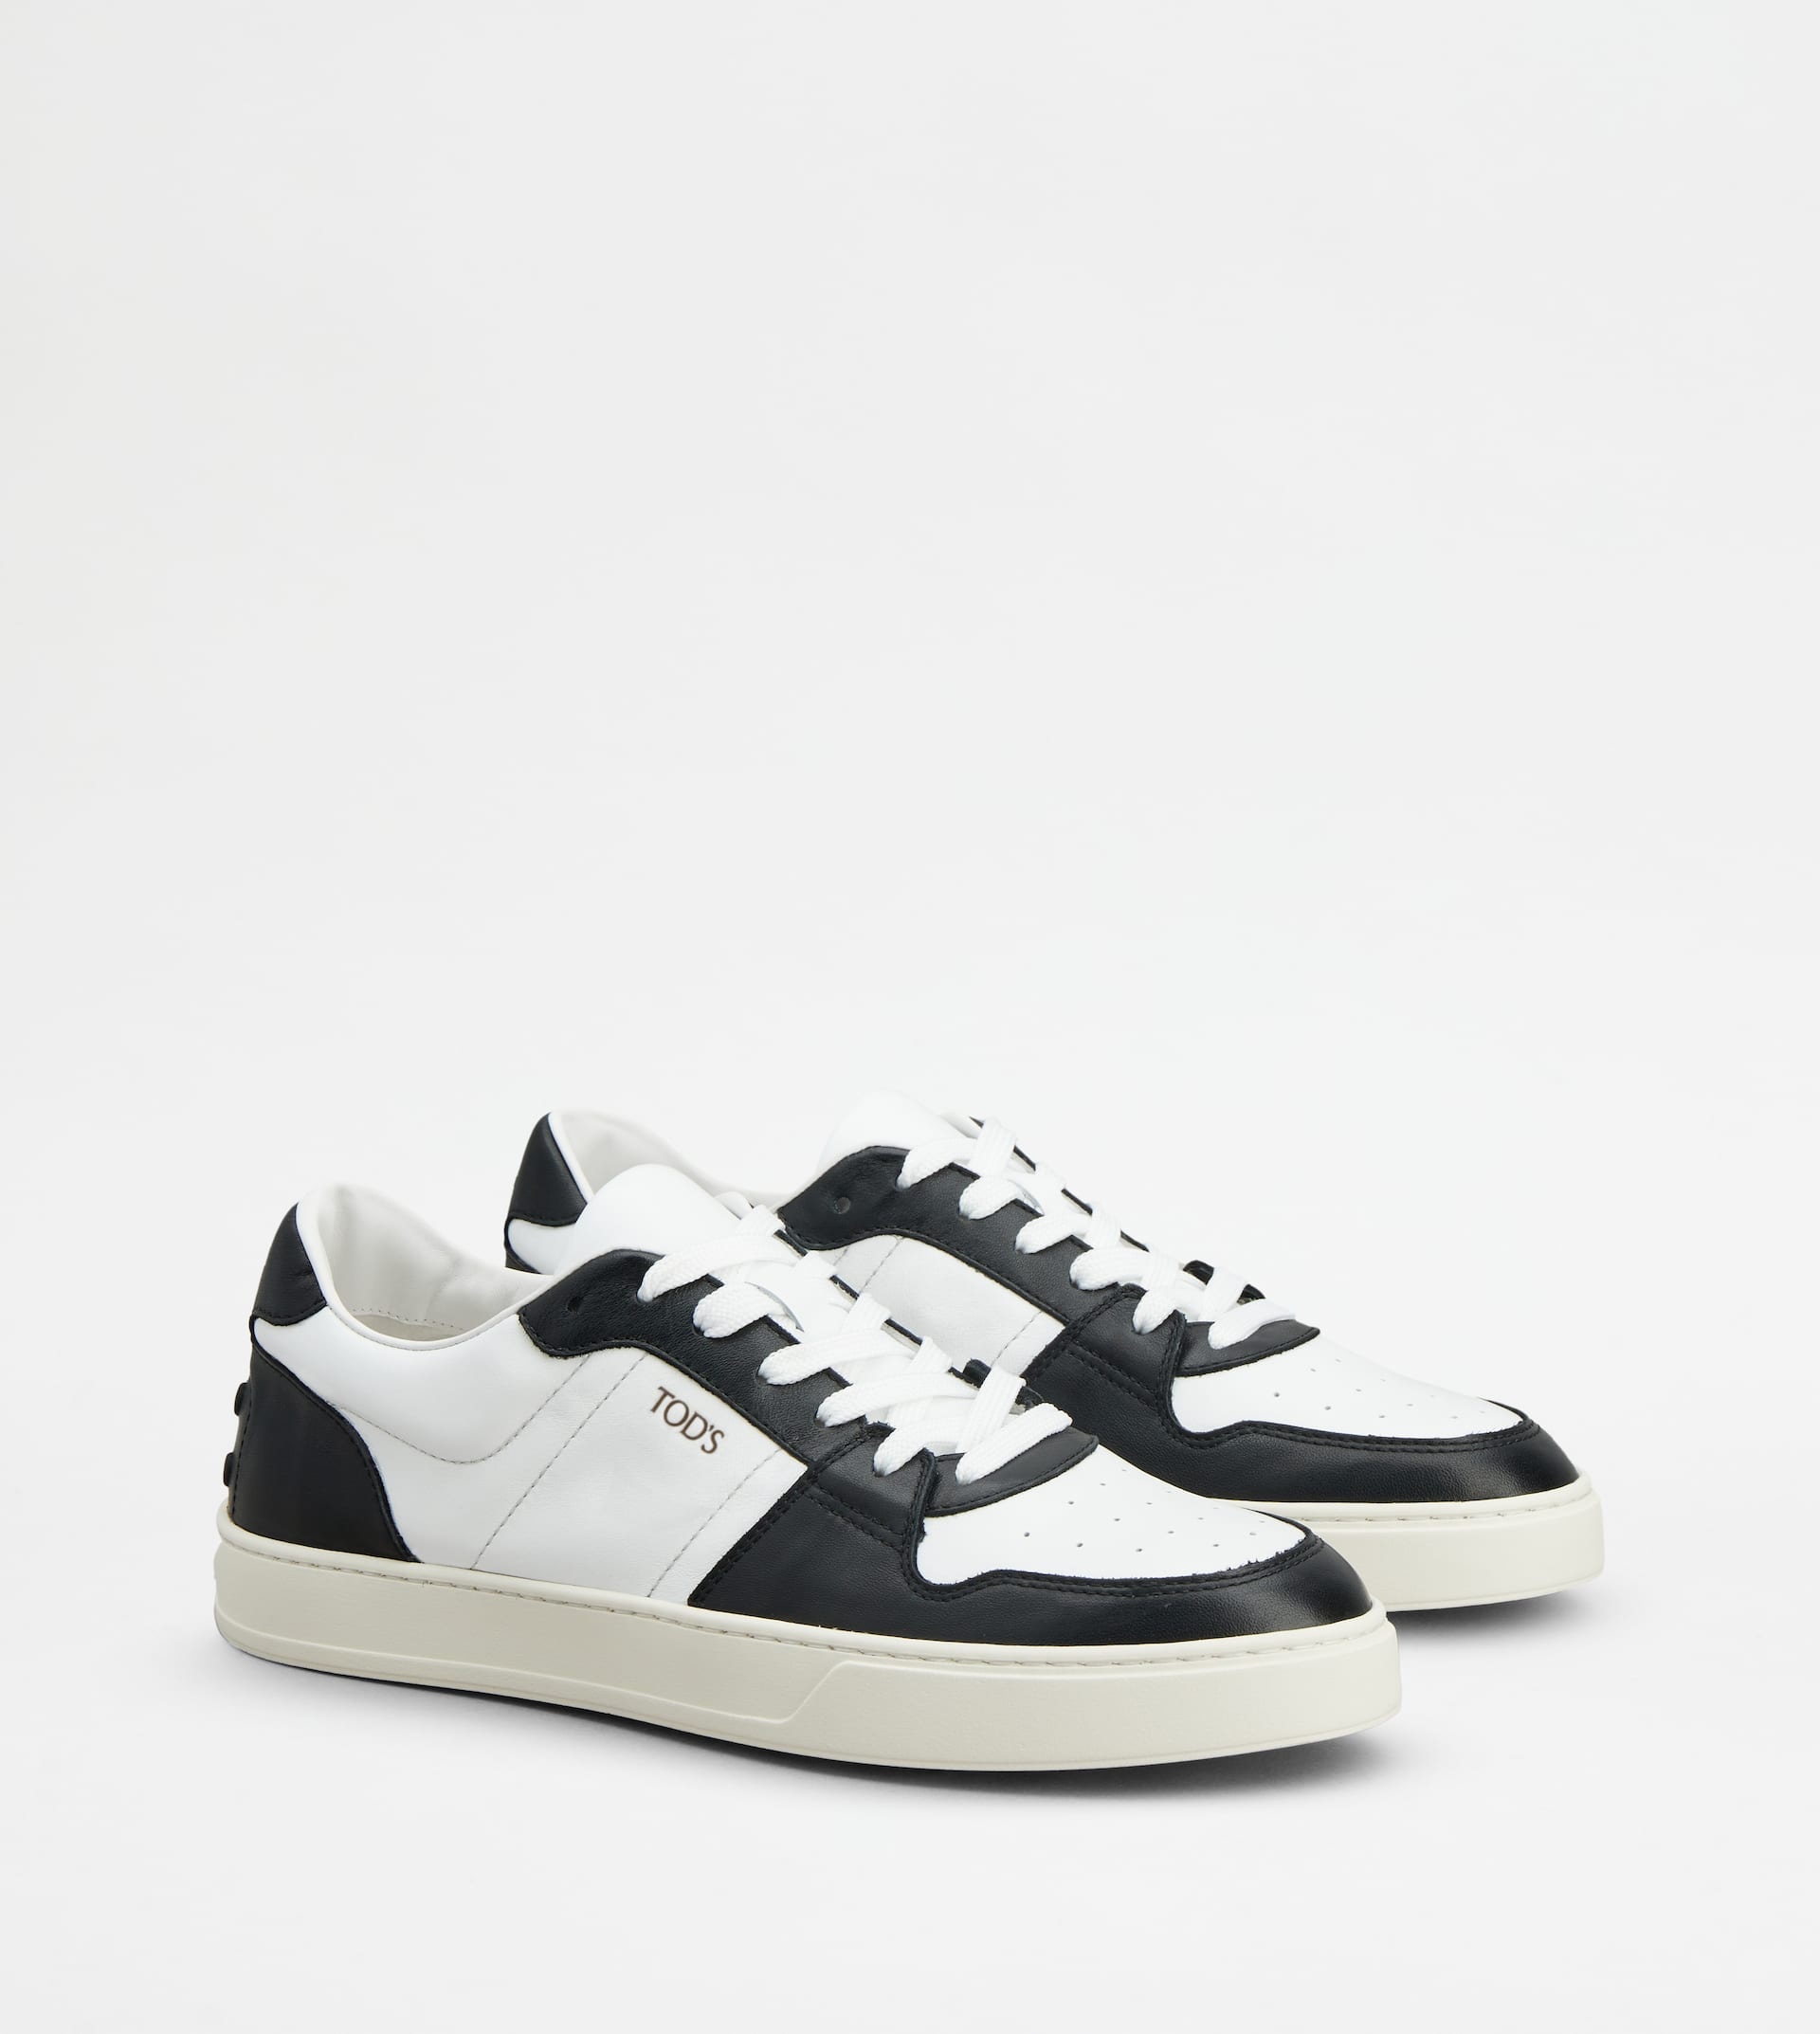 SNEAKERS IN LEATHER - WHITE, BLACK - 3